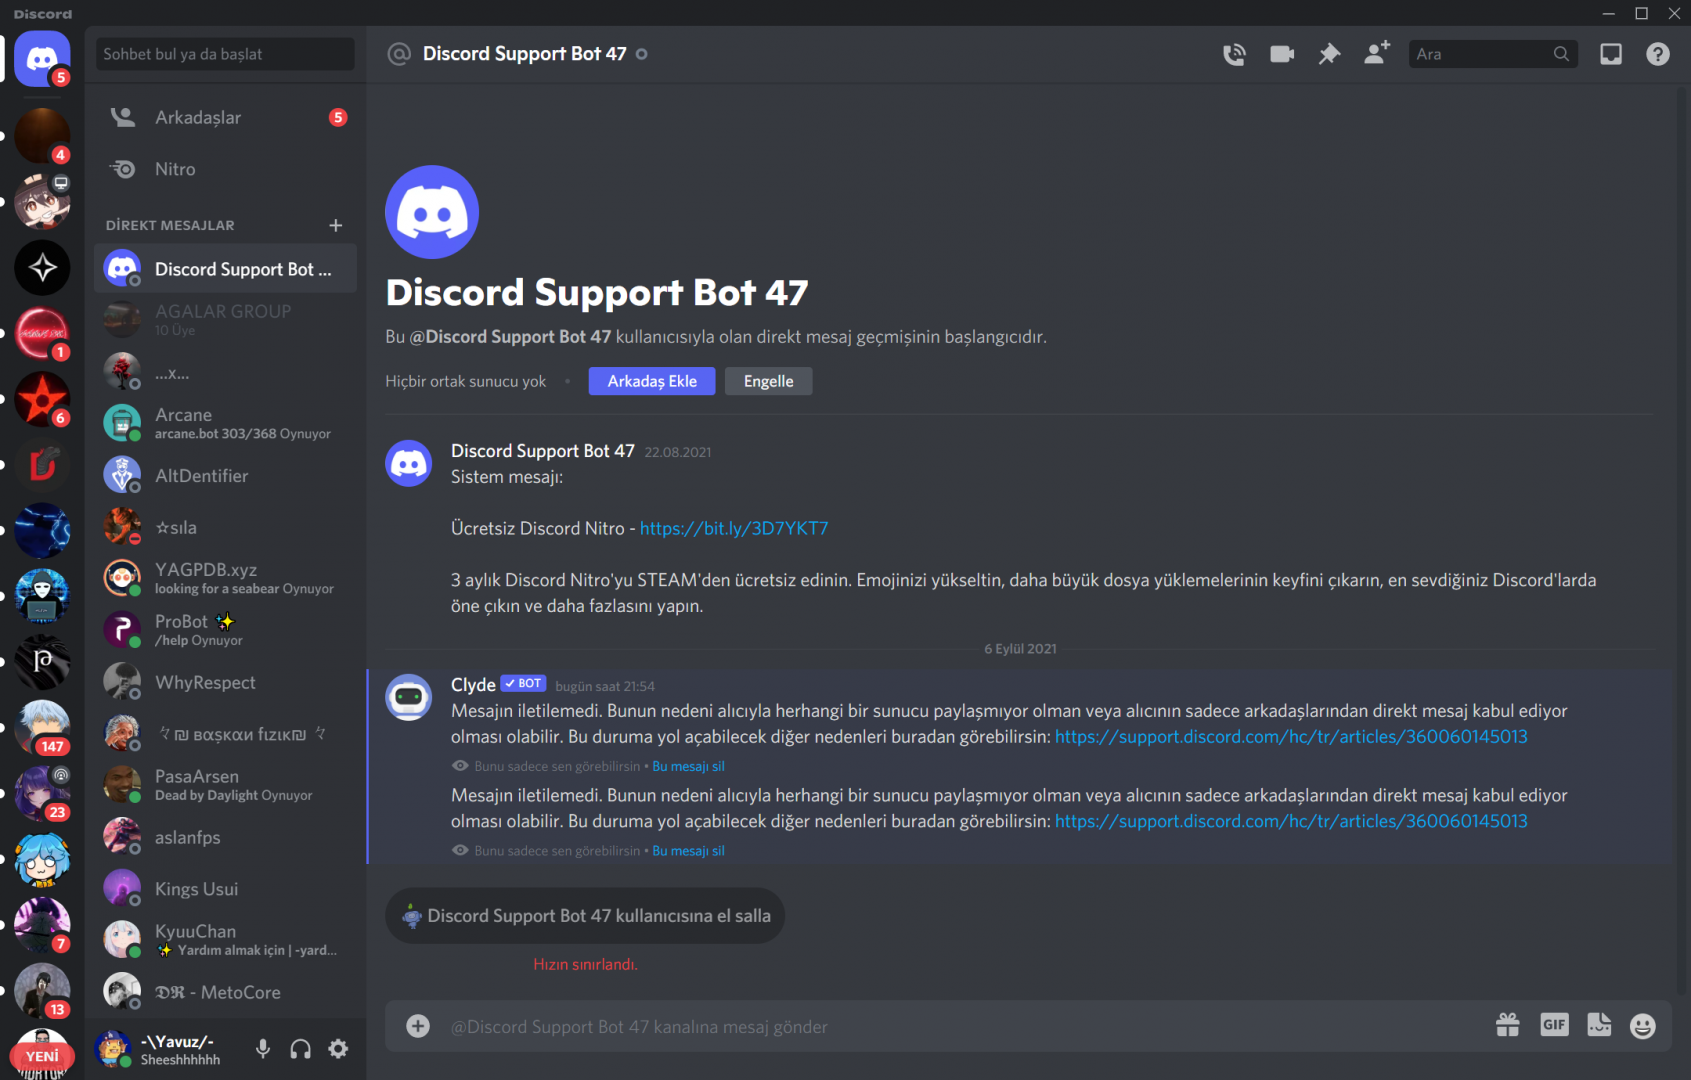 Discord Support Bot 47 - Discord 6.09.2021 21_54_55.png